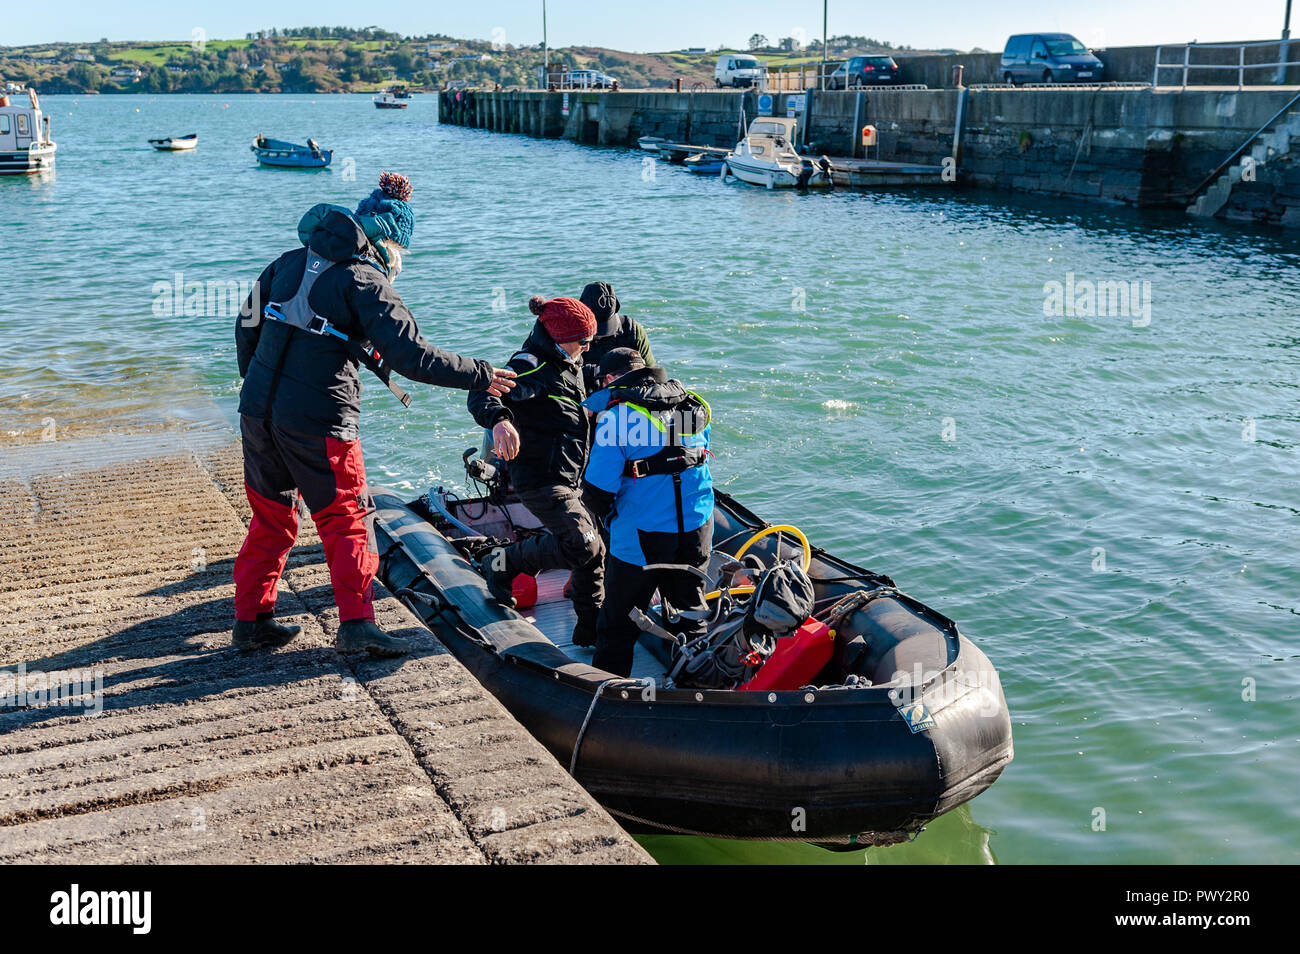 Schull, West Cork, Ireland. 18th Oct, 2018. Members of the National Parks and Wildlife Service board their RIB to spend a day counting seals and their pups around the islands near Schull as part of the Irish Government's conservation policy. The day will be dry and bright with sunny spells and temperatures of 11 to 14°C. Credit: Andy Gibson/Alamy Live News. Stock Photo